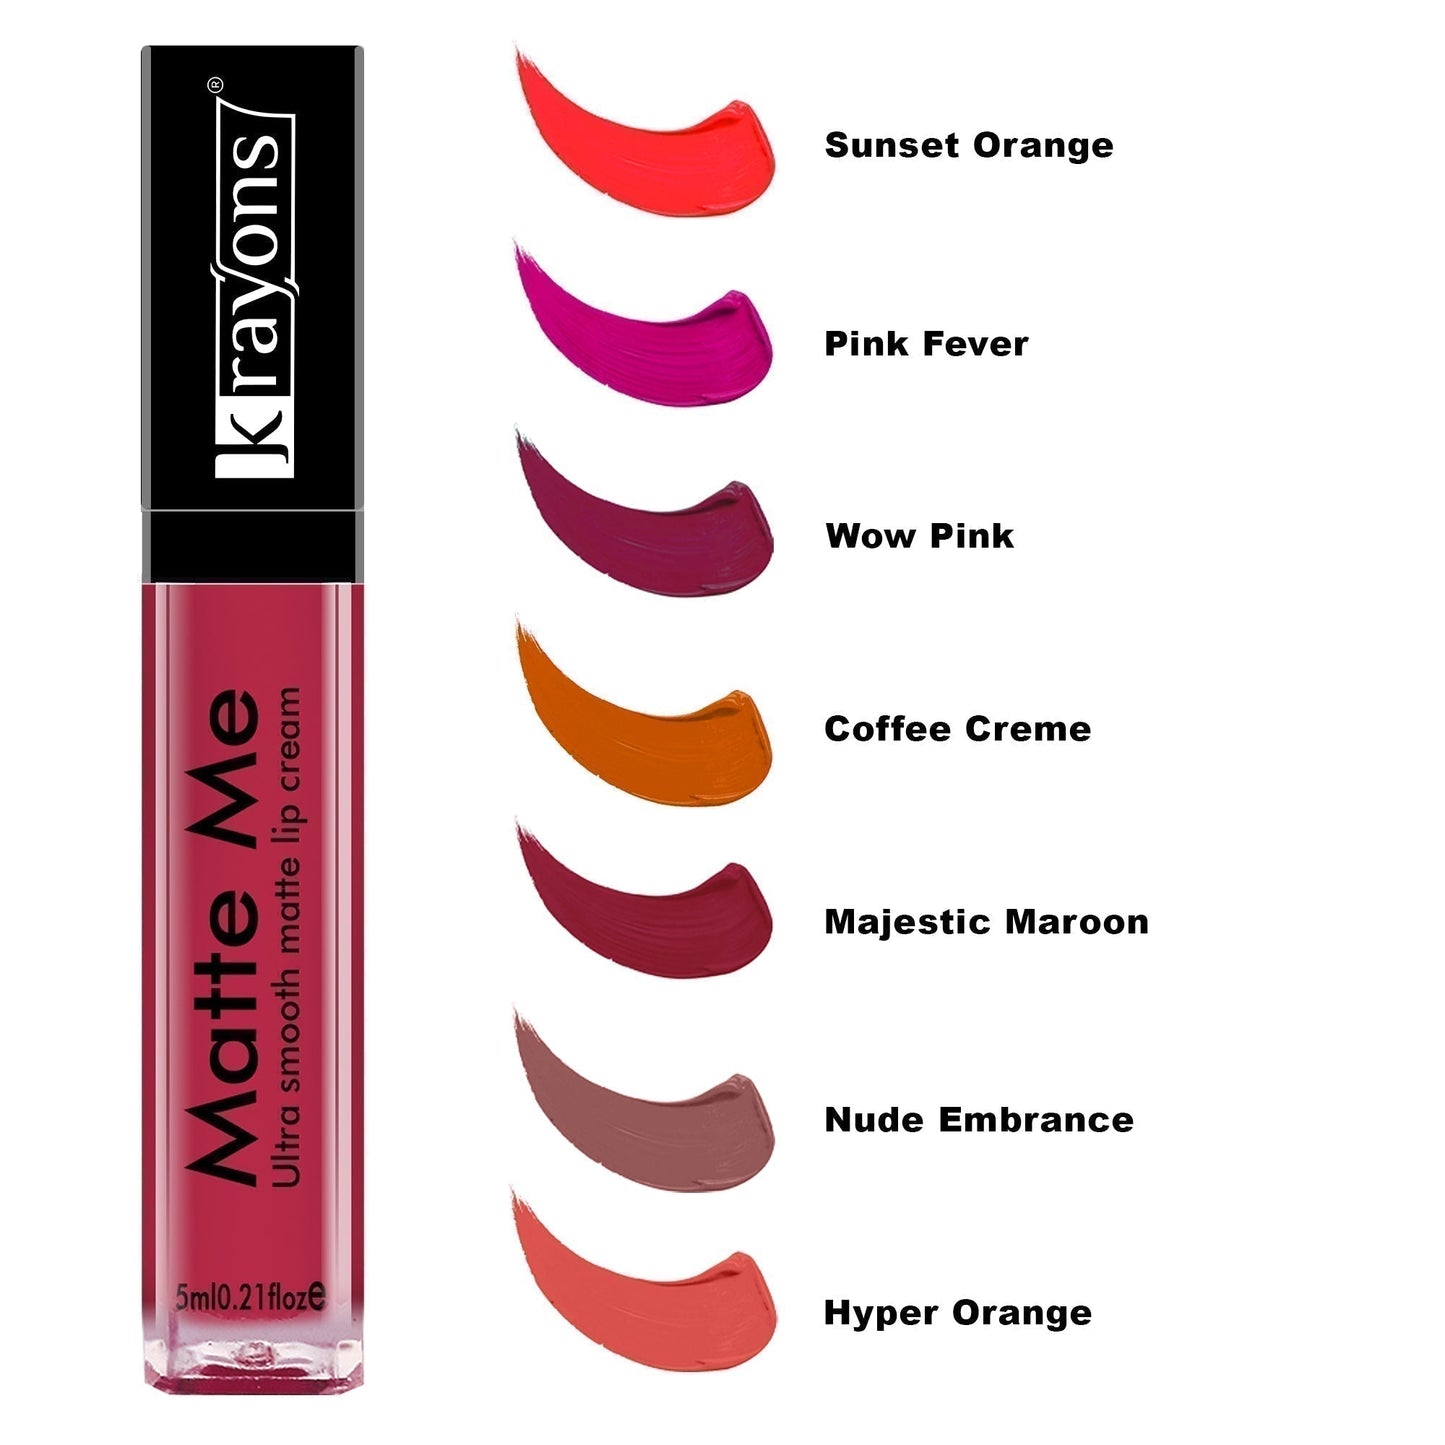 Krayons Matte Me Ultra Smooth Matte Liquid Lip Color, Mask Proof, Waterproof, Longlasting, 5ml Each, Combo, Pack of 3 (Sunset Orange, Coffee Creme, Nude Embrace)